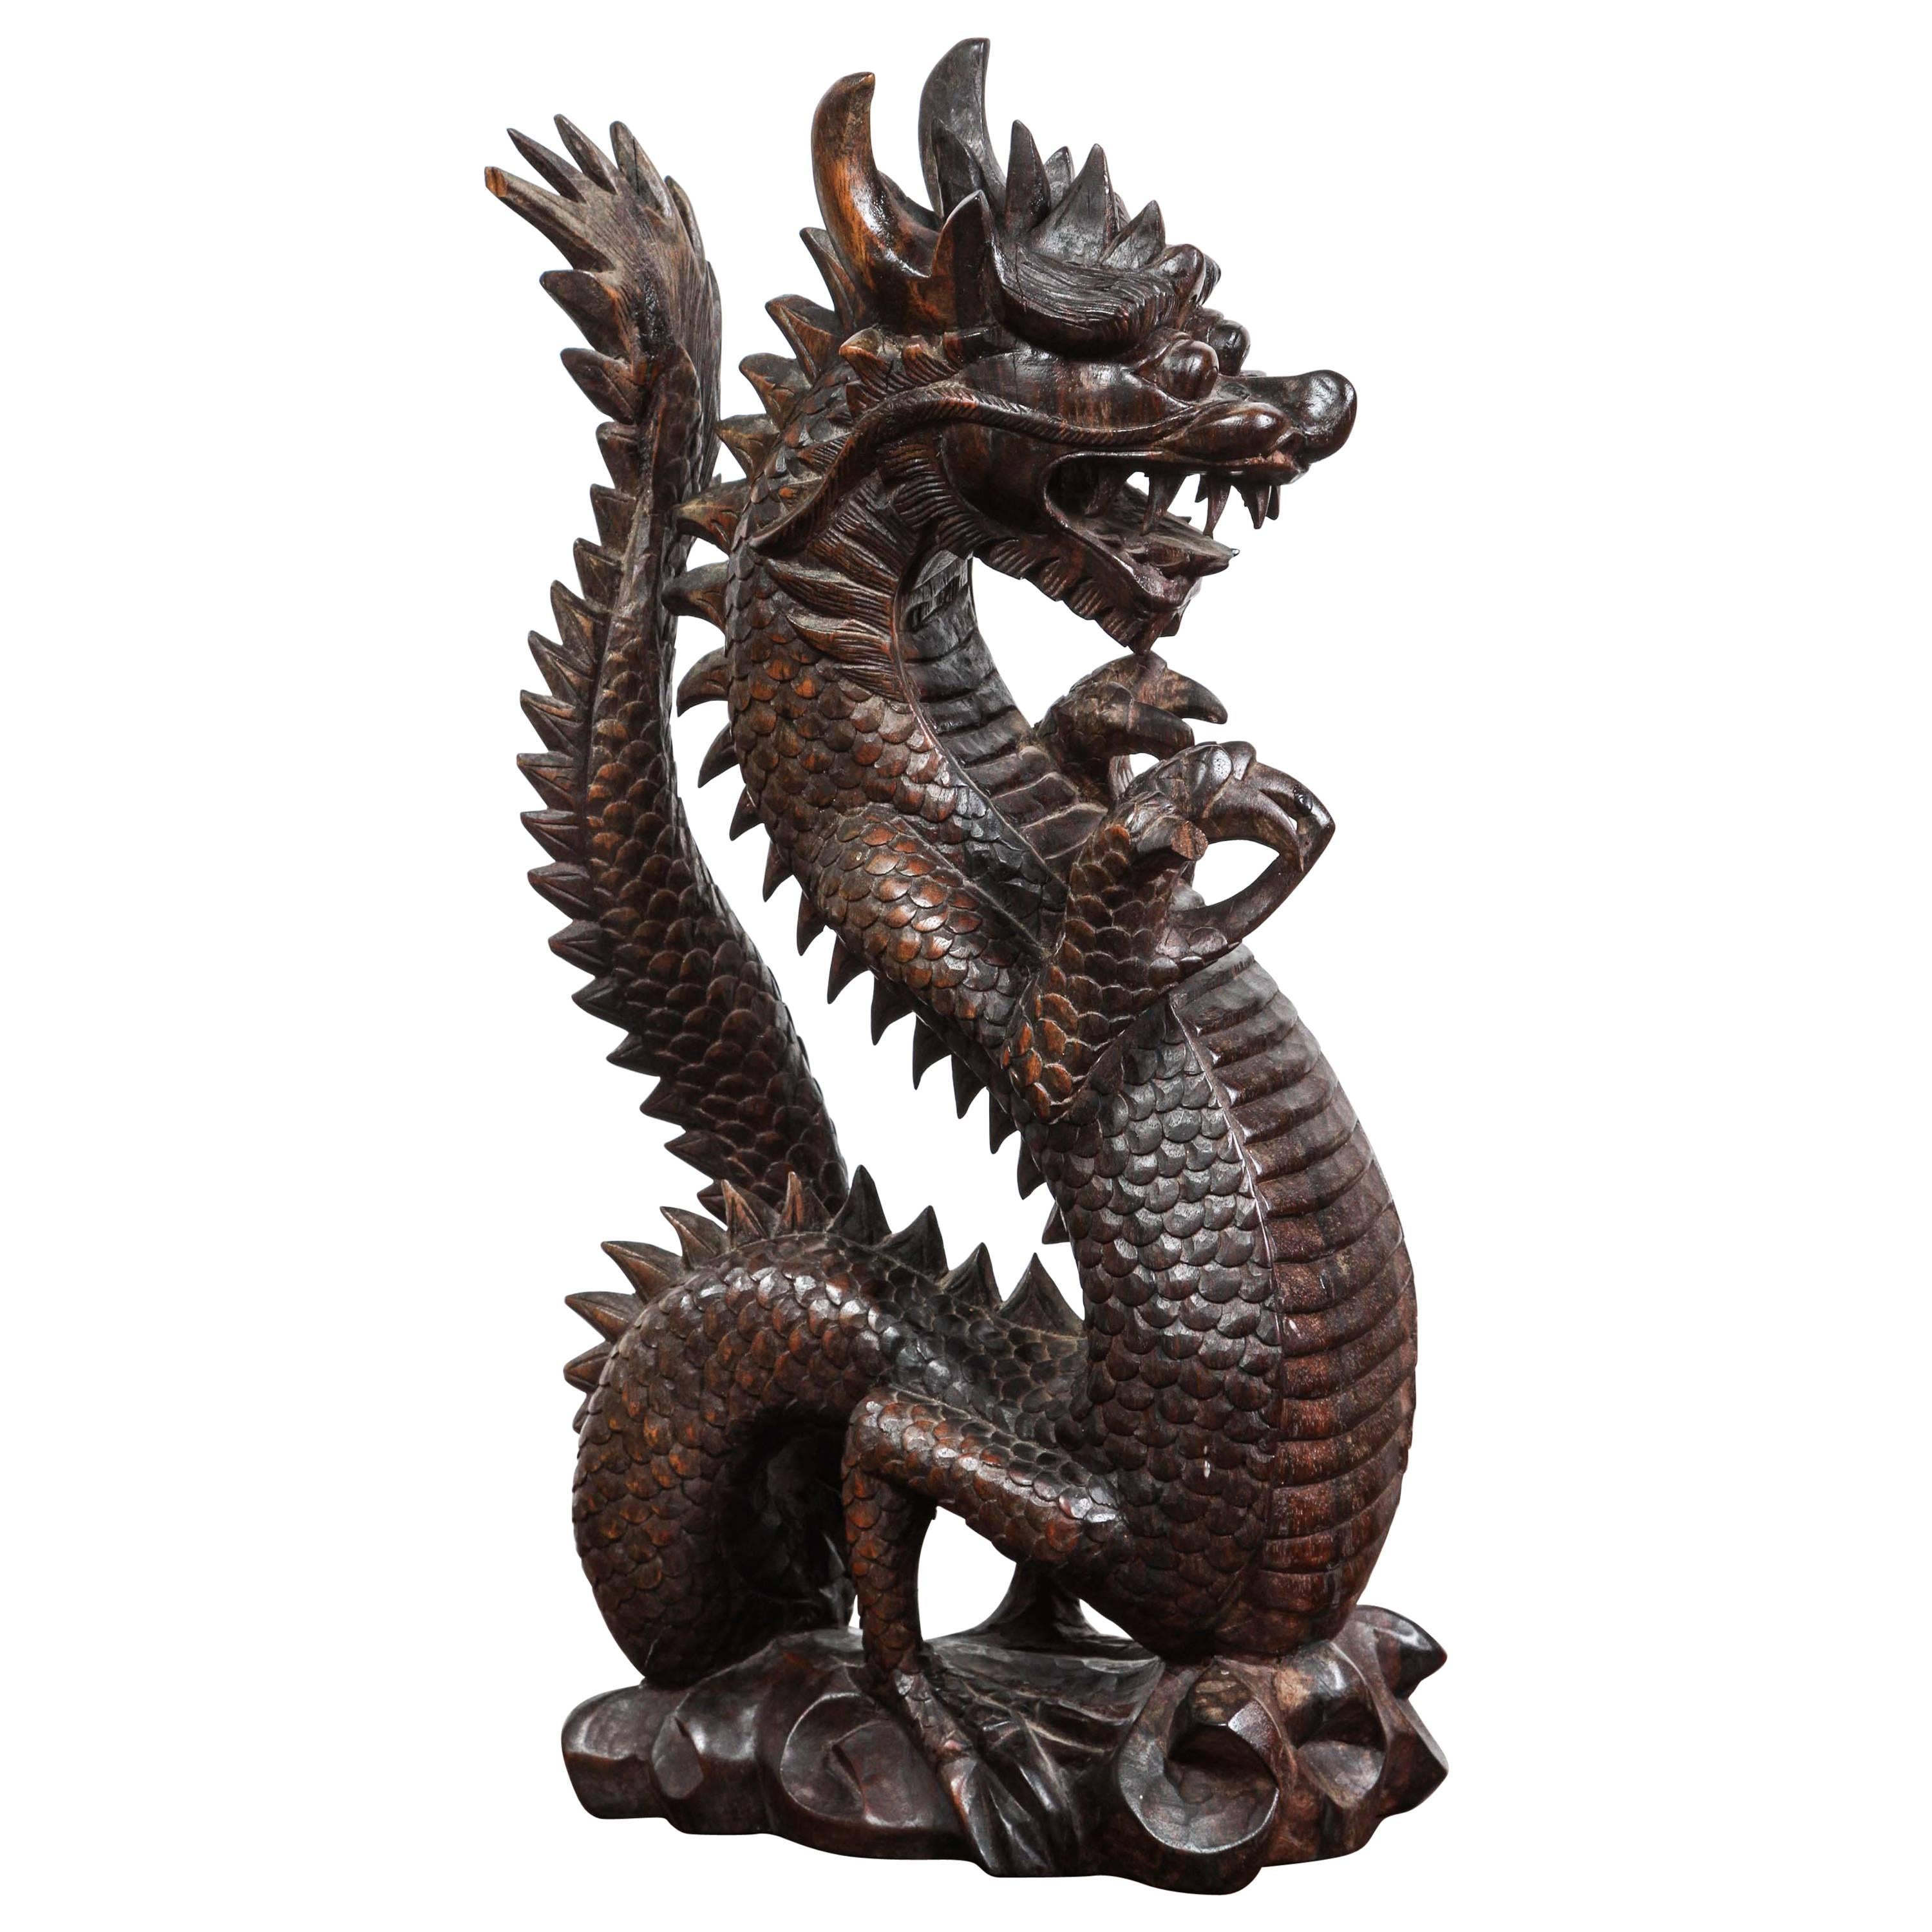 Wooden Sculpture of a Roaring Chinese Dragon